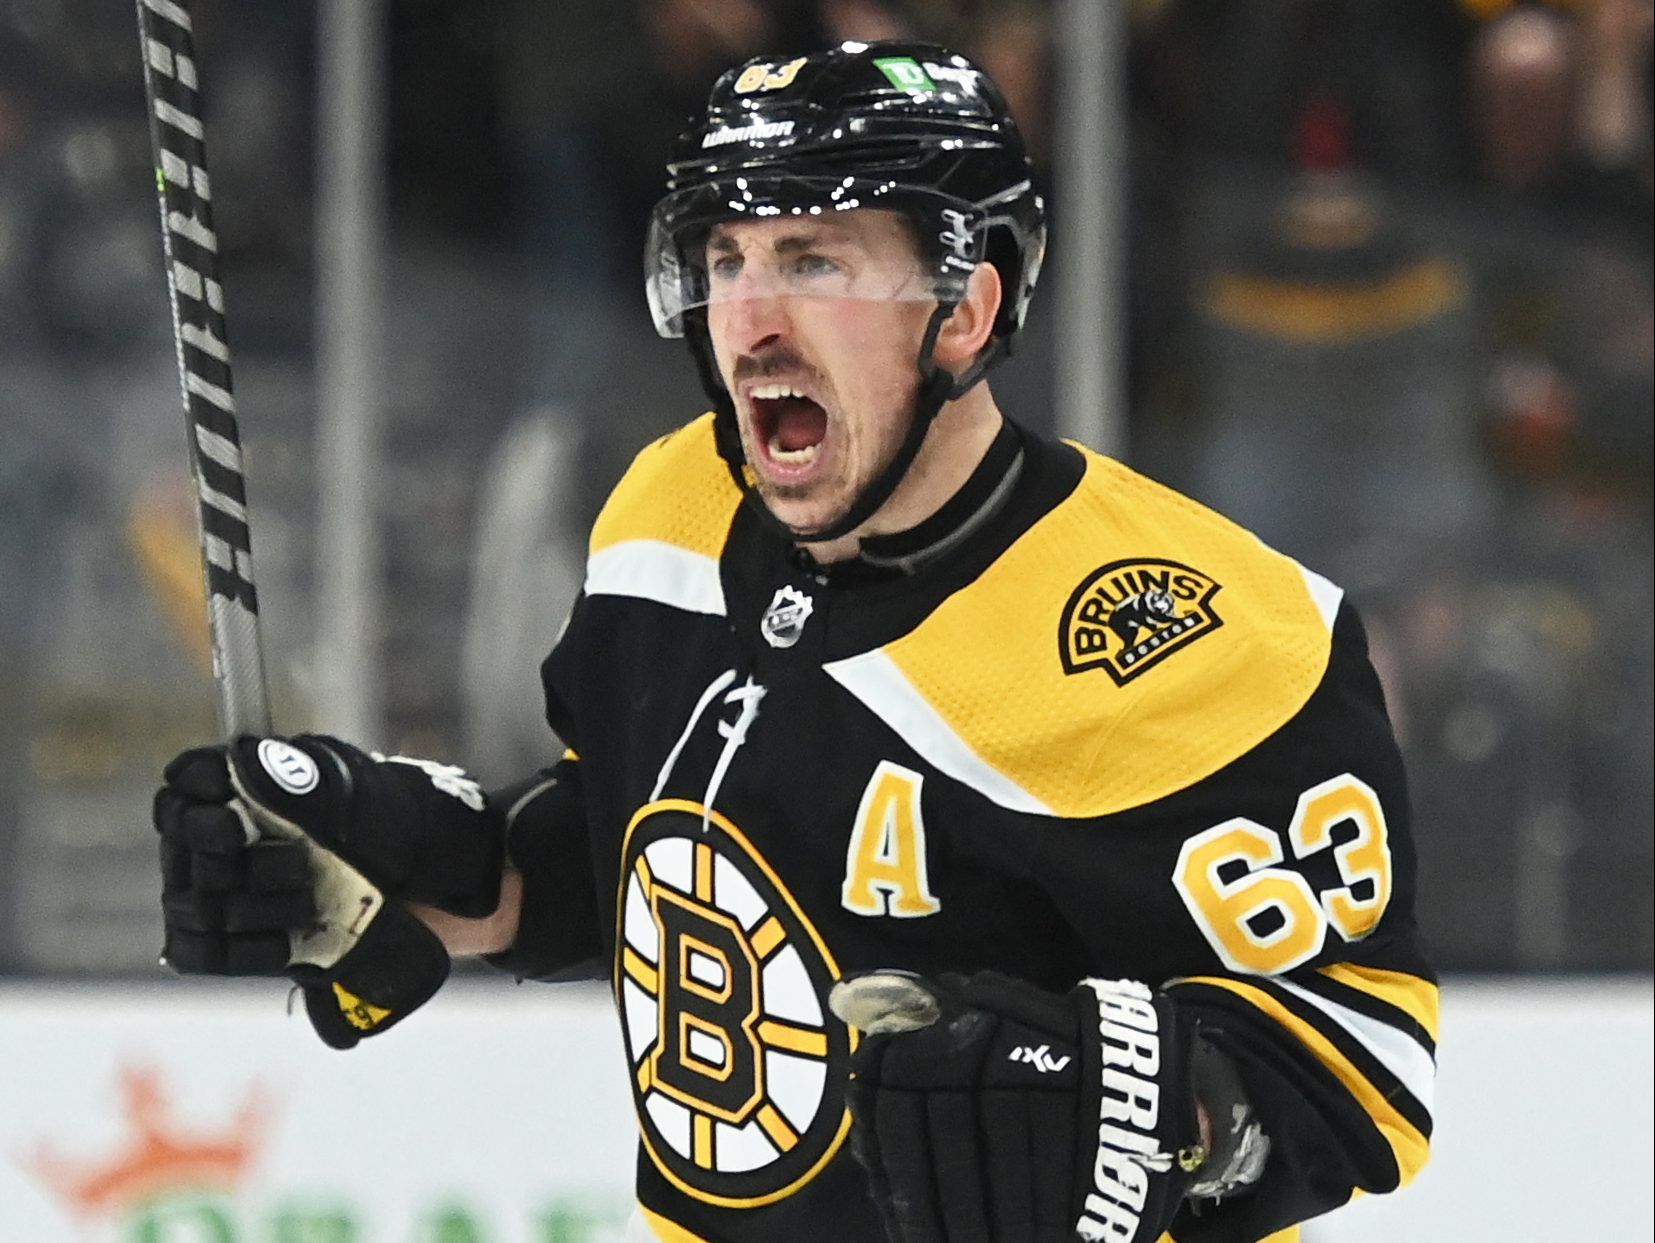 Boston Bruins Most Hated NHL Team In World, According To Reddit Map (Photo)  